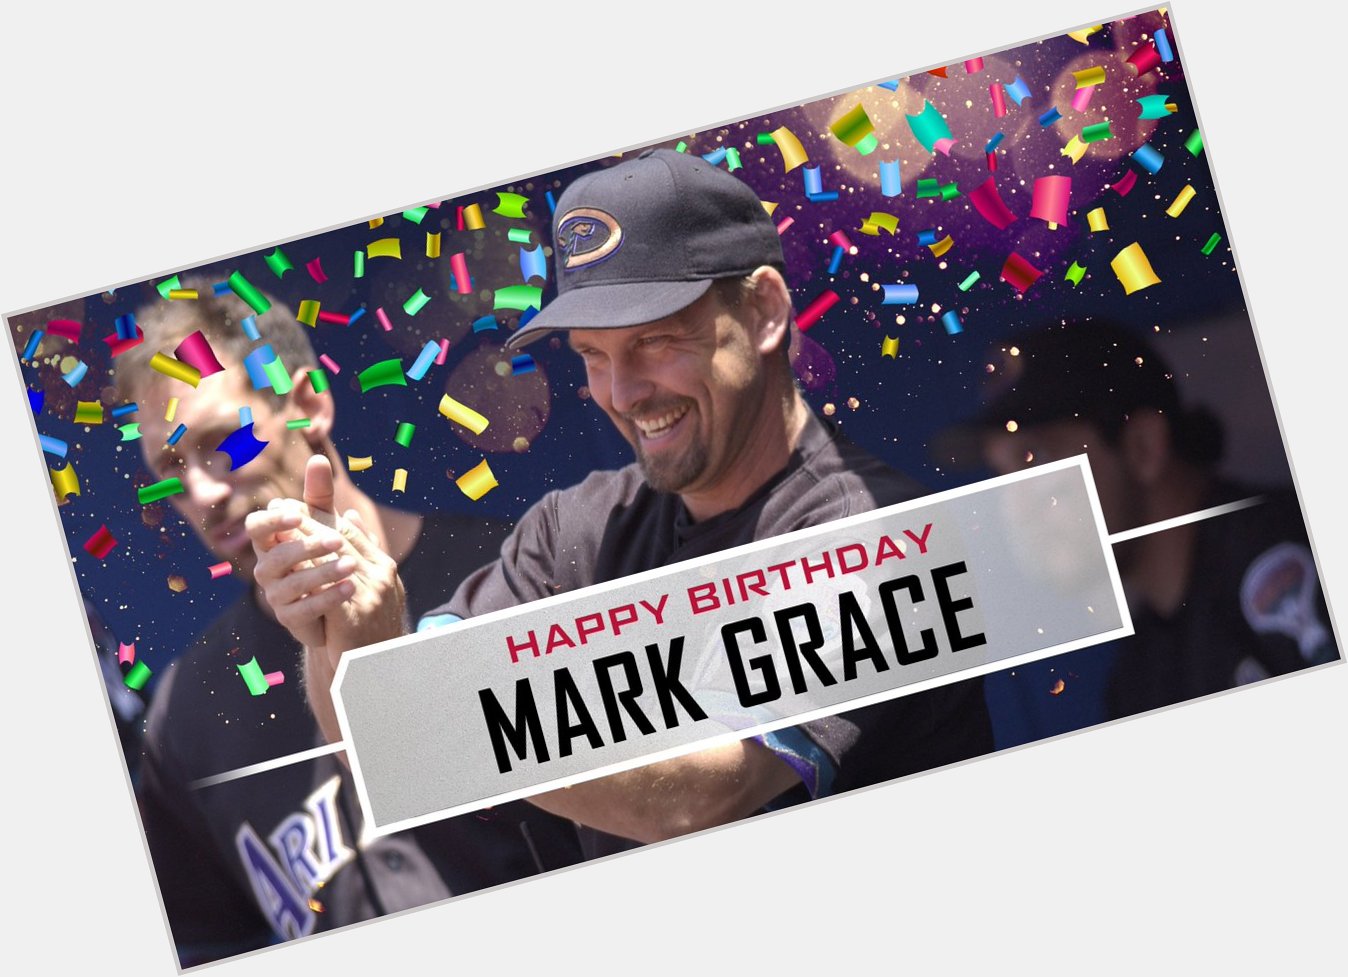 Join us in wishing Mark Grace a very happy birthday! 